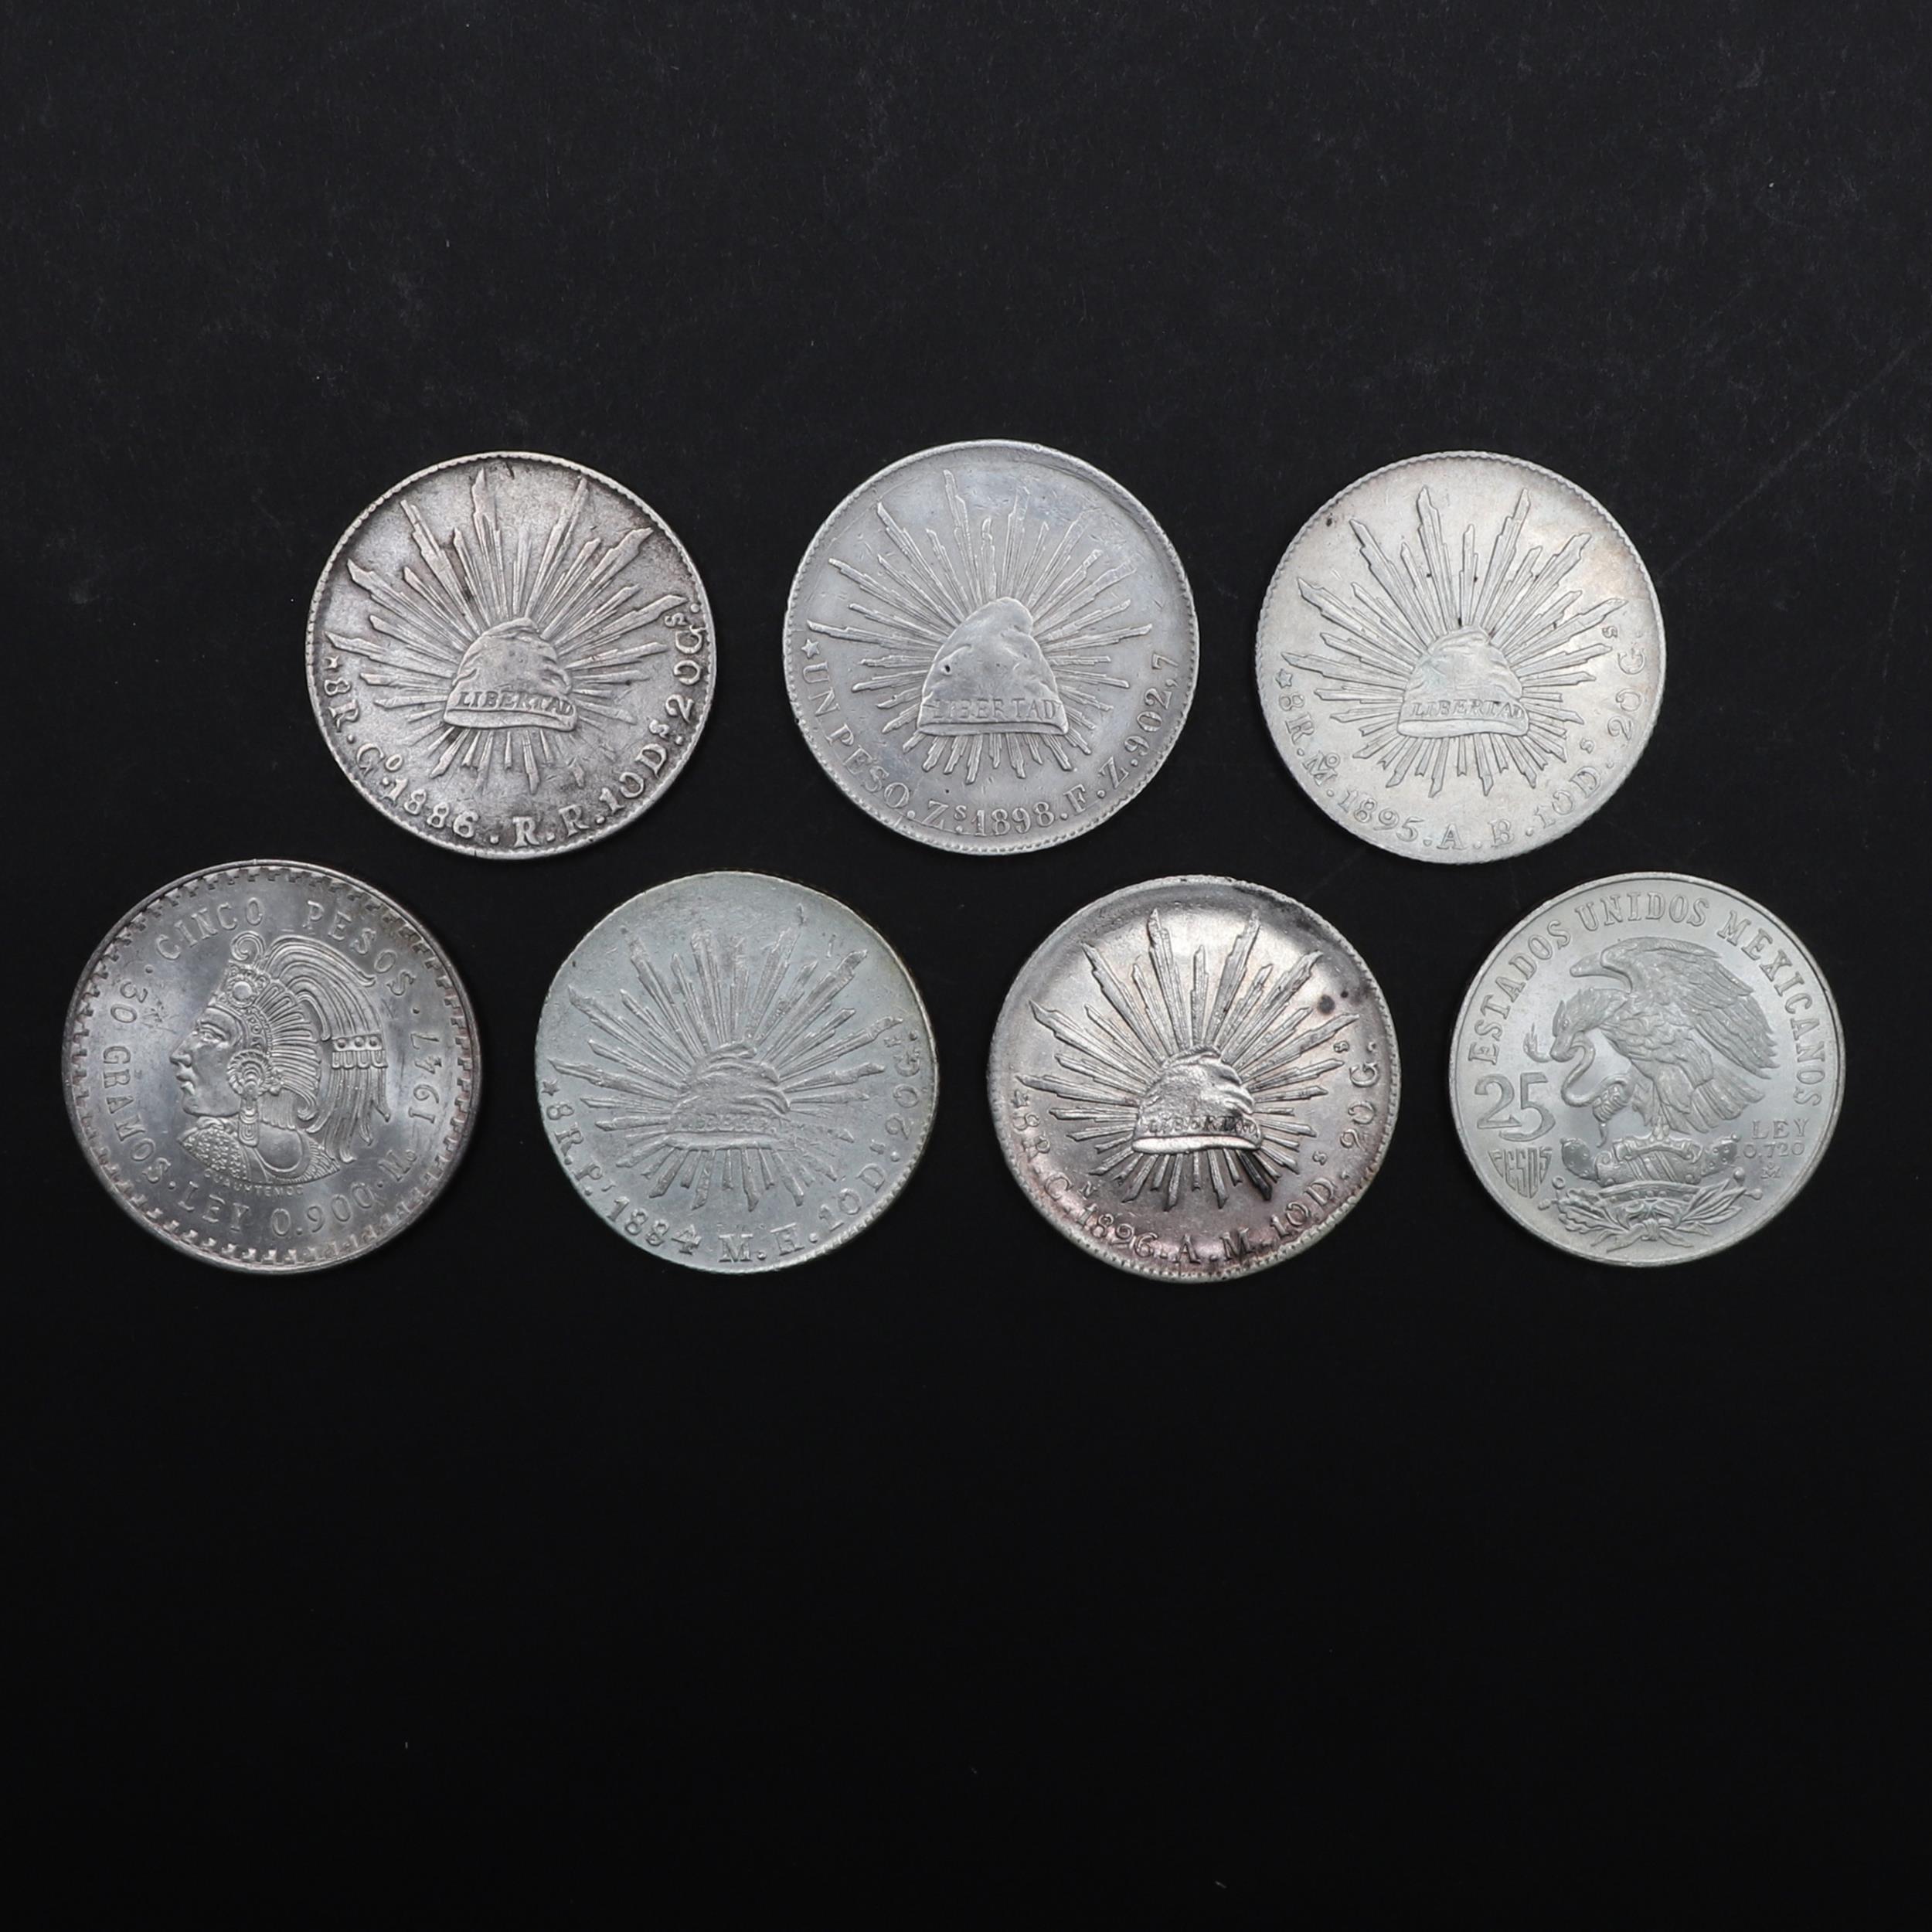 A COLLECTION OF MEXICAN 8 REALES COINS, 1895 AND LATER. - Image 2 of 4